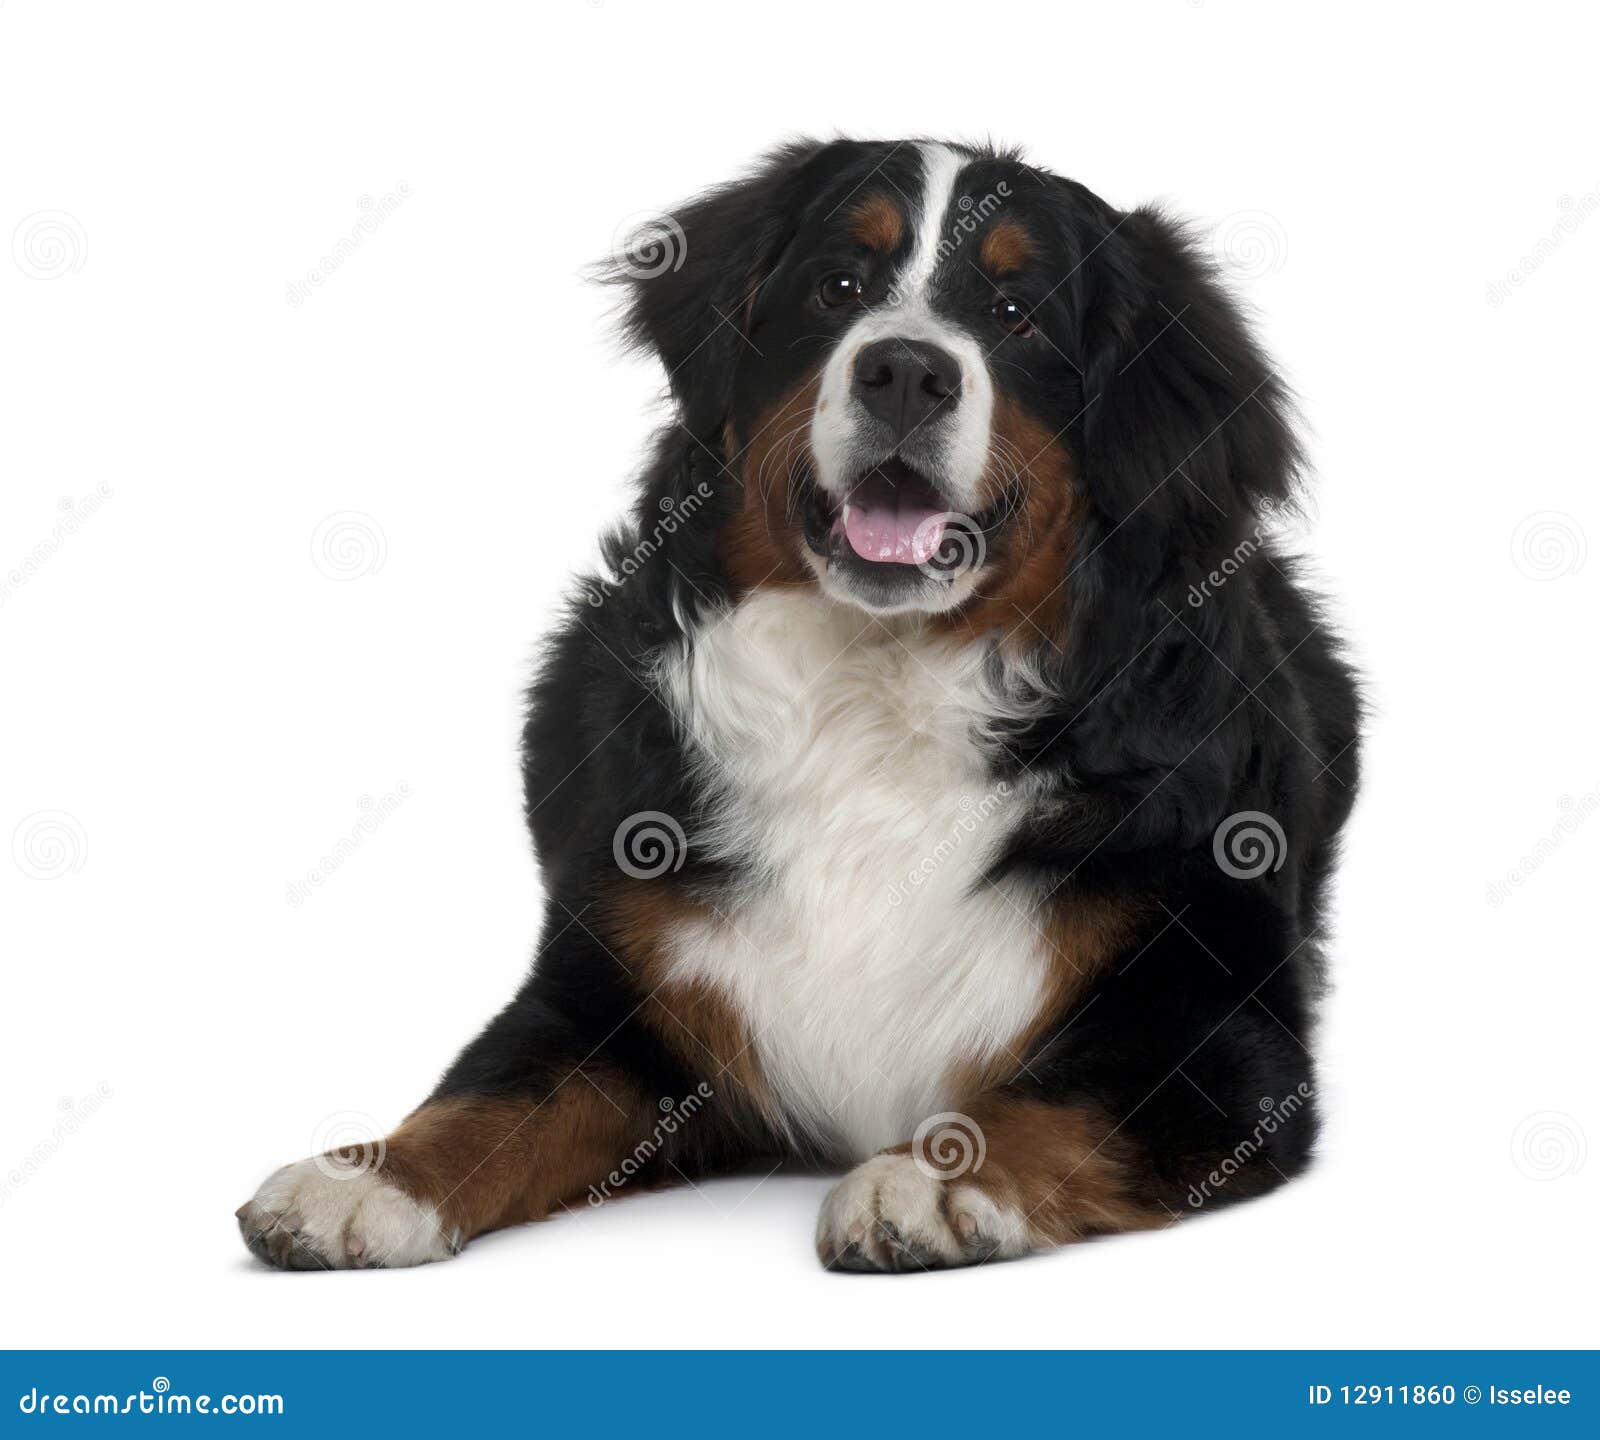 bernese mountain dog, lying down and panting